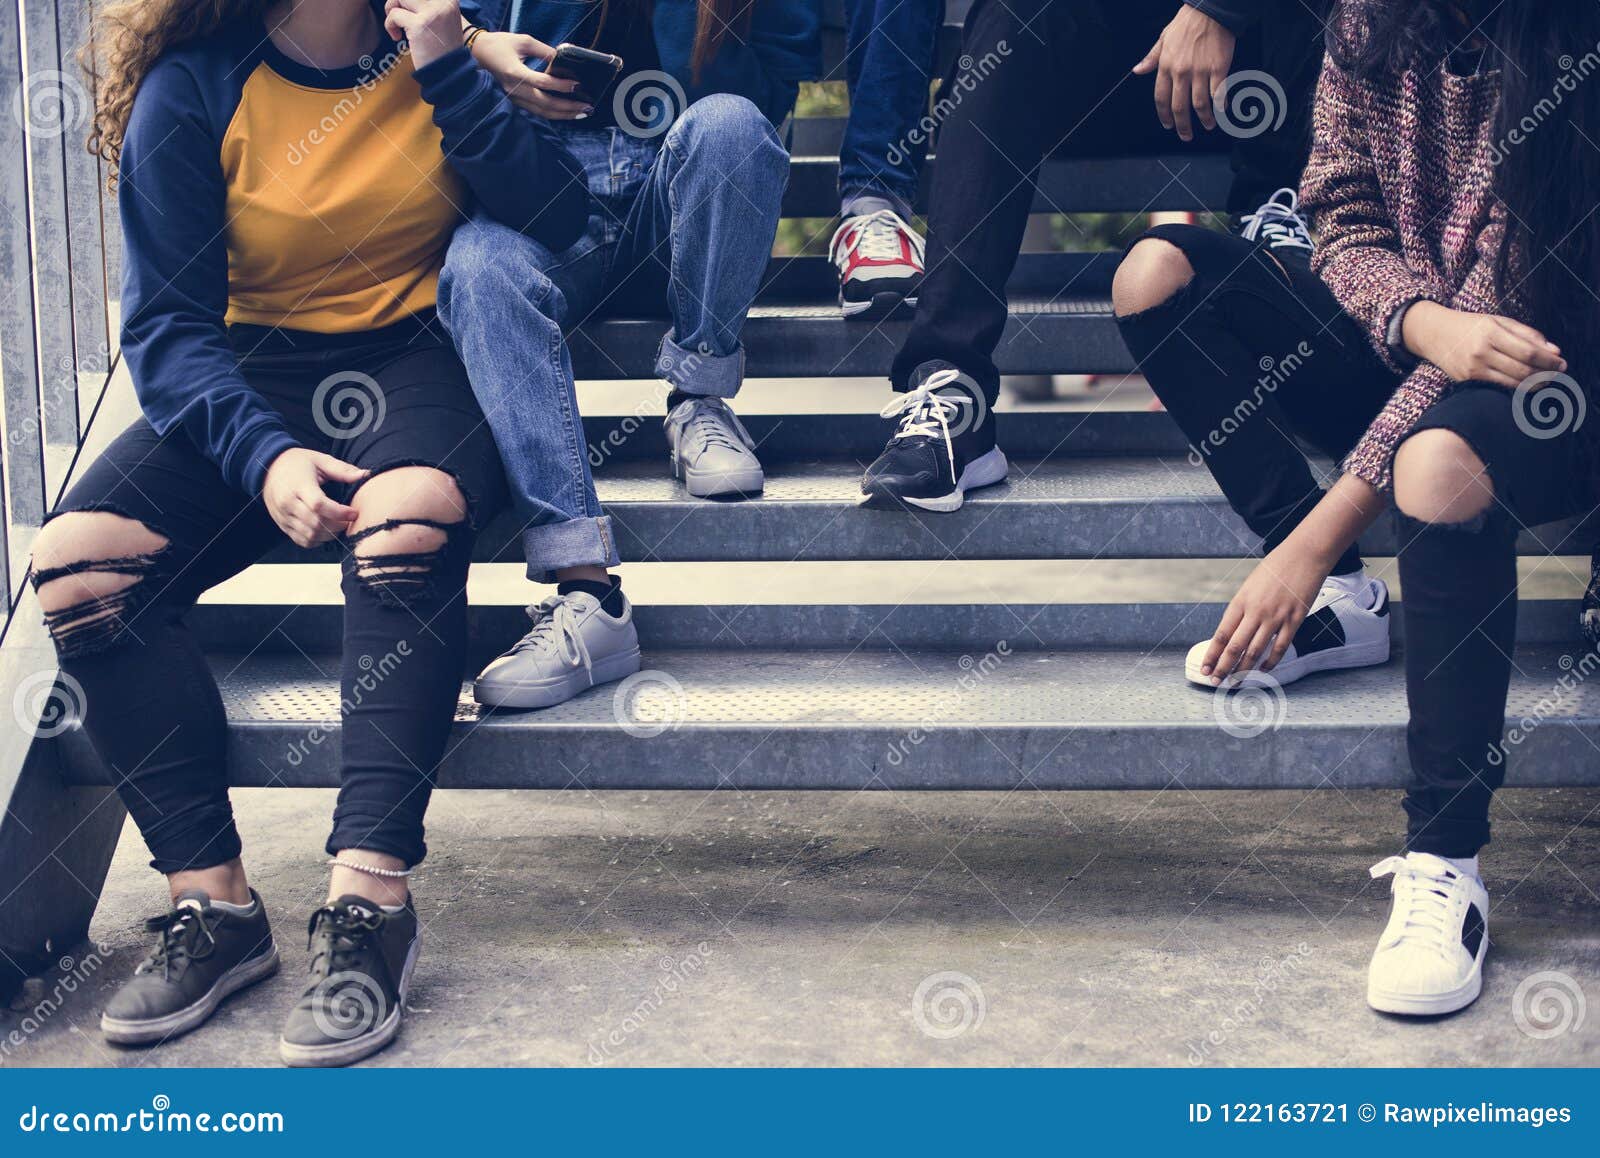 group of school friends outdoors lifestyle and after school hangout concept